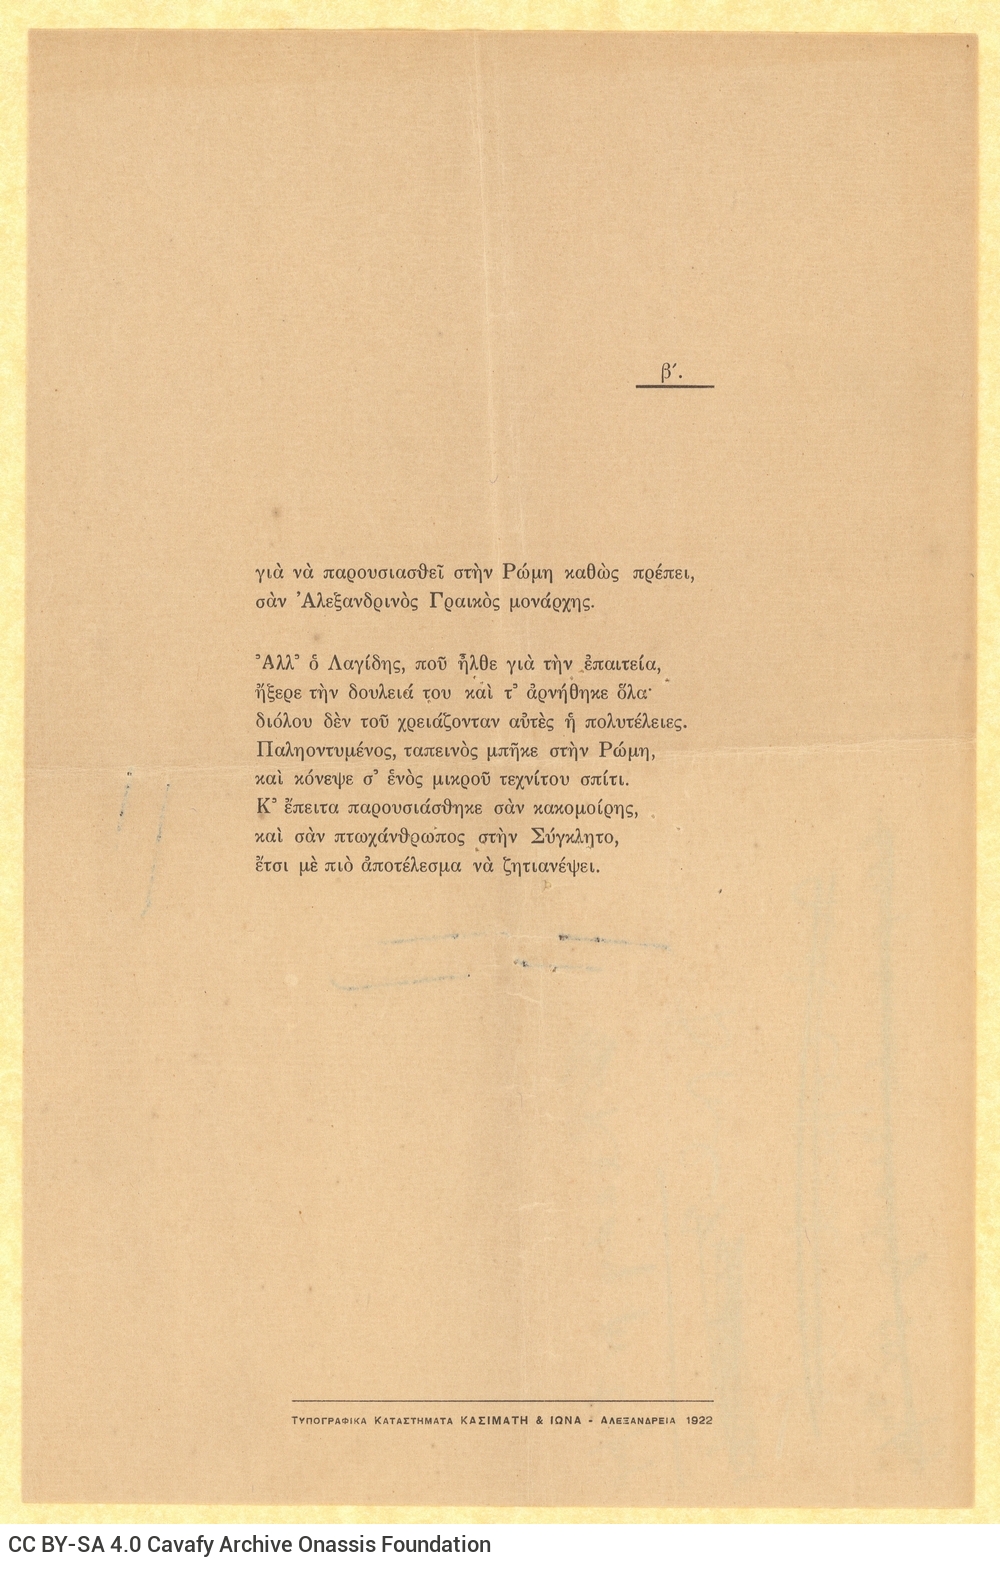 Handwritten English translation of the poem "The Seleucid's Displeasure" by G. Valassopoulo on both sides of a sheet. Manu